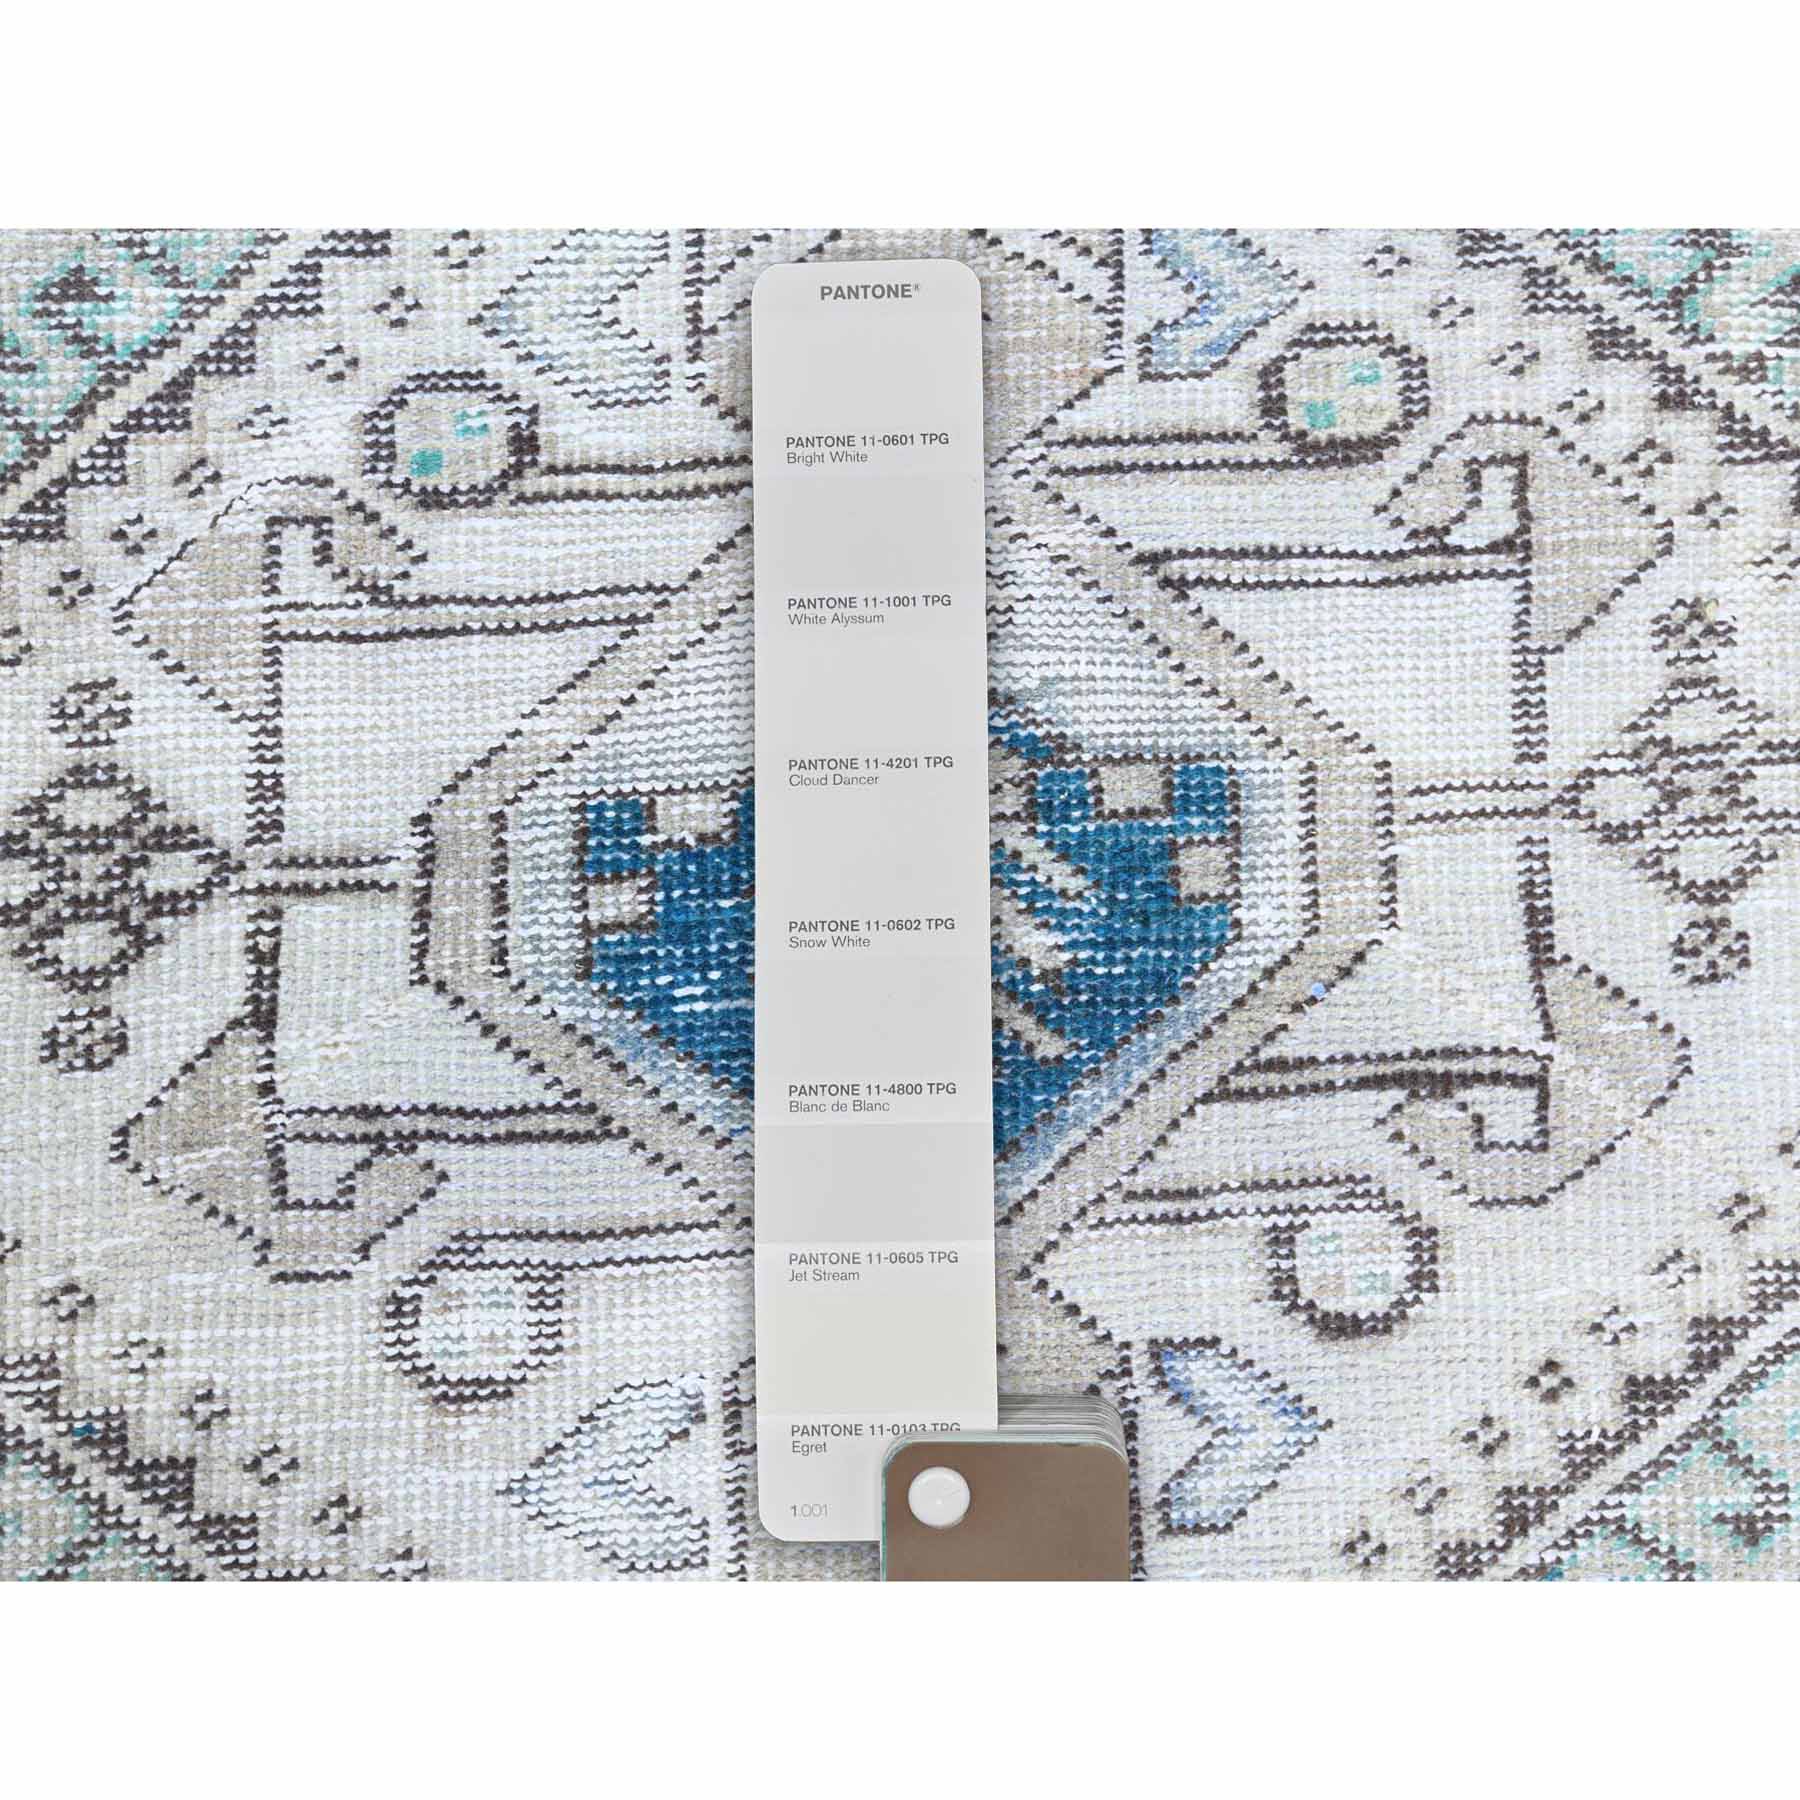 Overdyed-Vintage-Hand-Knotted-Rug-305390